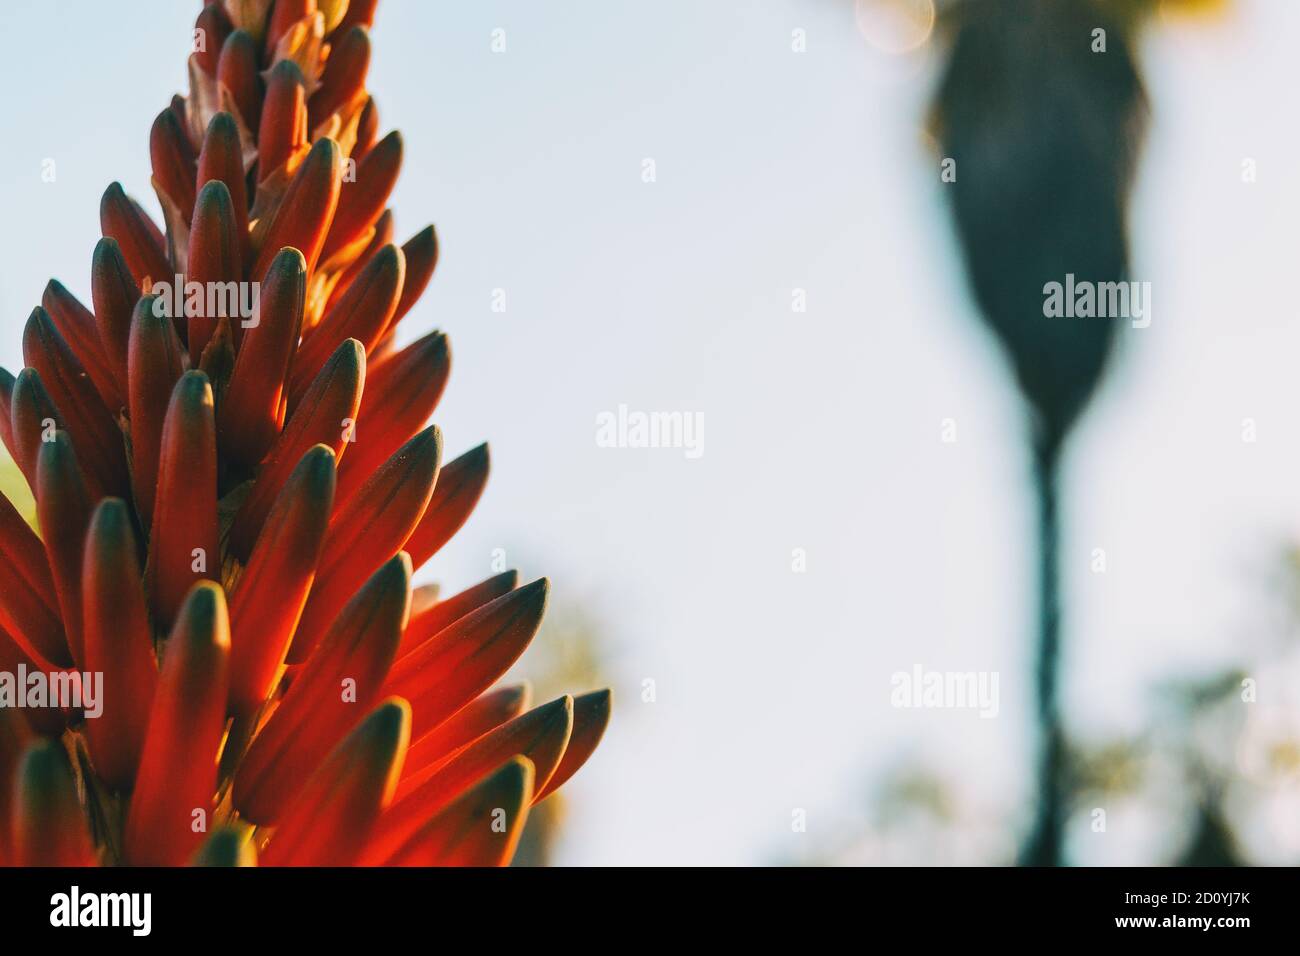 Close-up of a cluster of buds of an aloe arborescens plant illuminated by sunlight Stock Photo